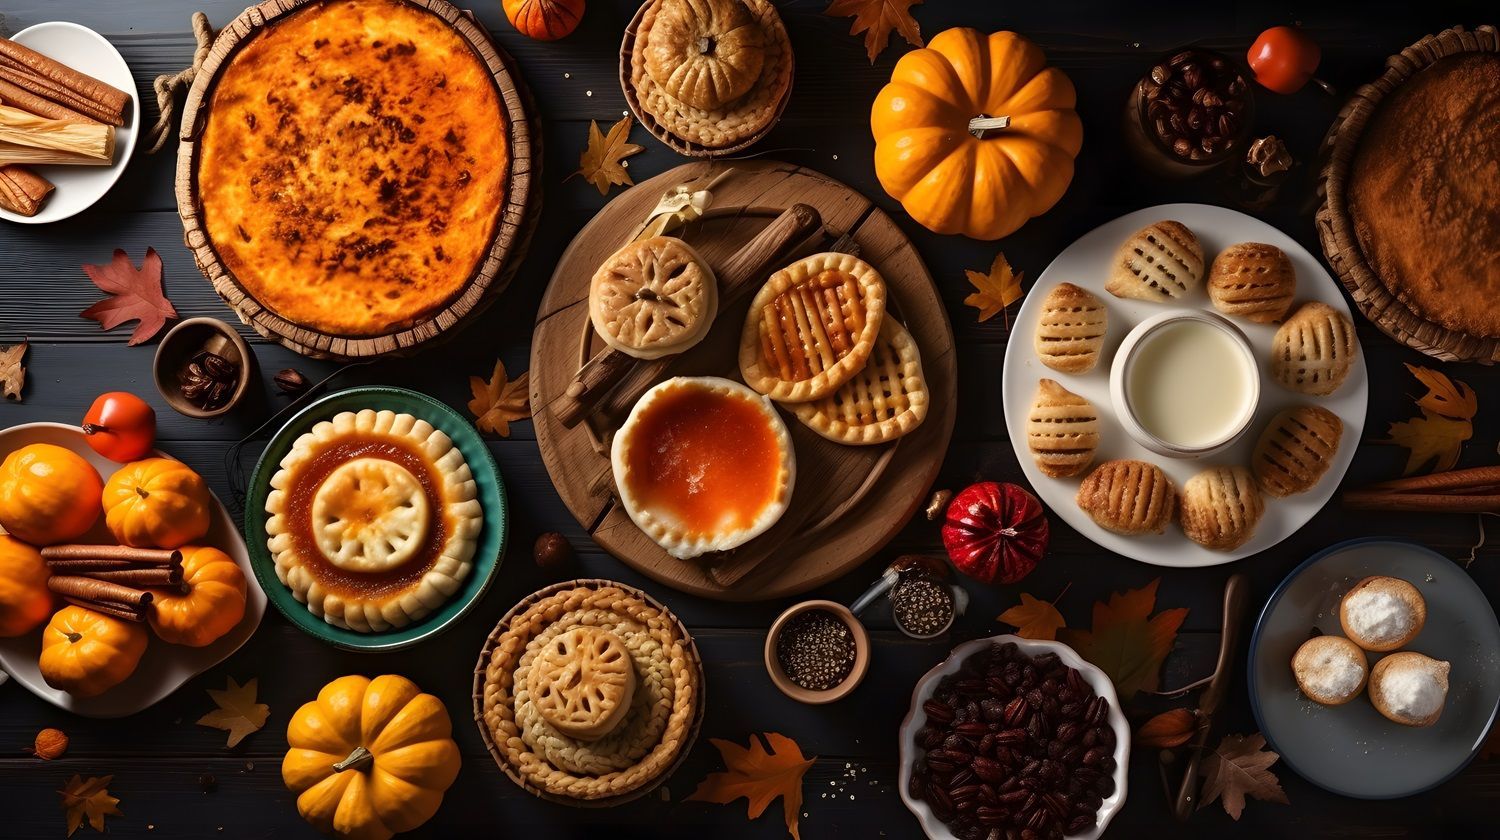 Thanksgiving pies, cookies, and other desserts, along with cinnamon, clove, allspice, and other holiday spices.